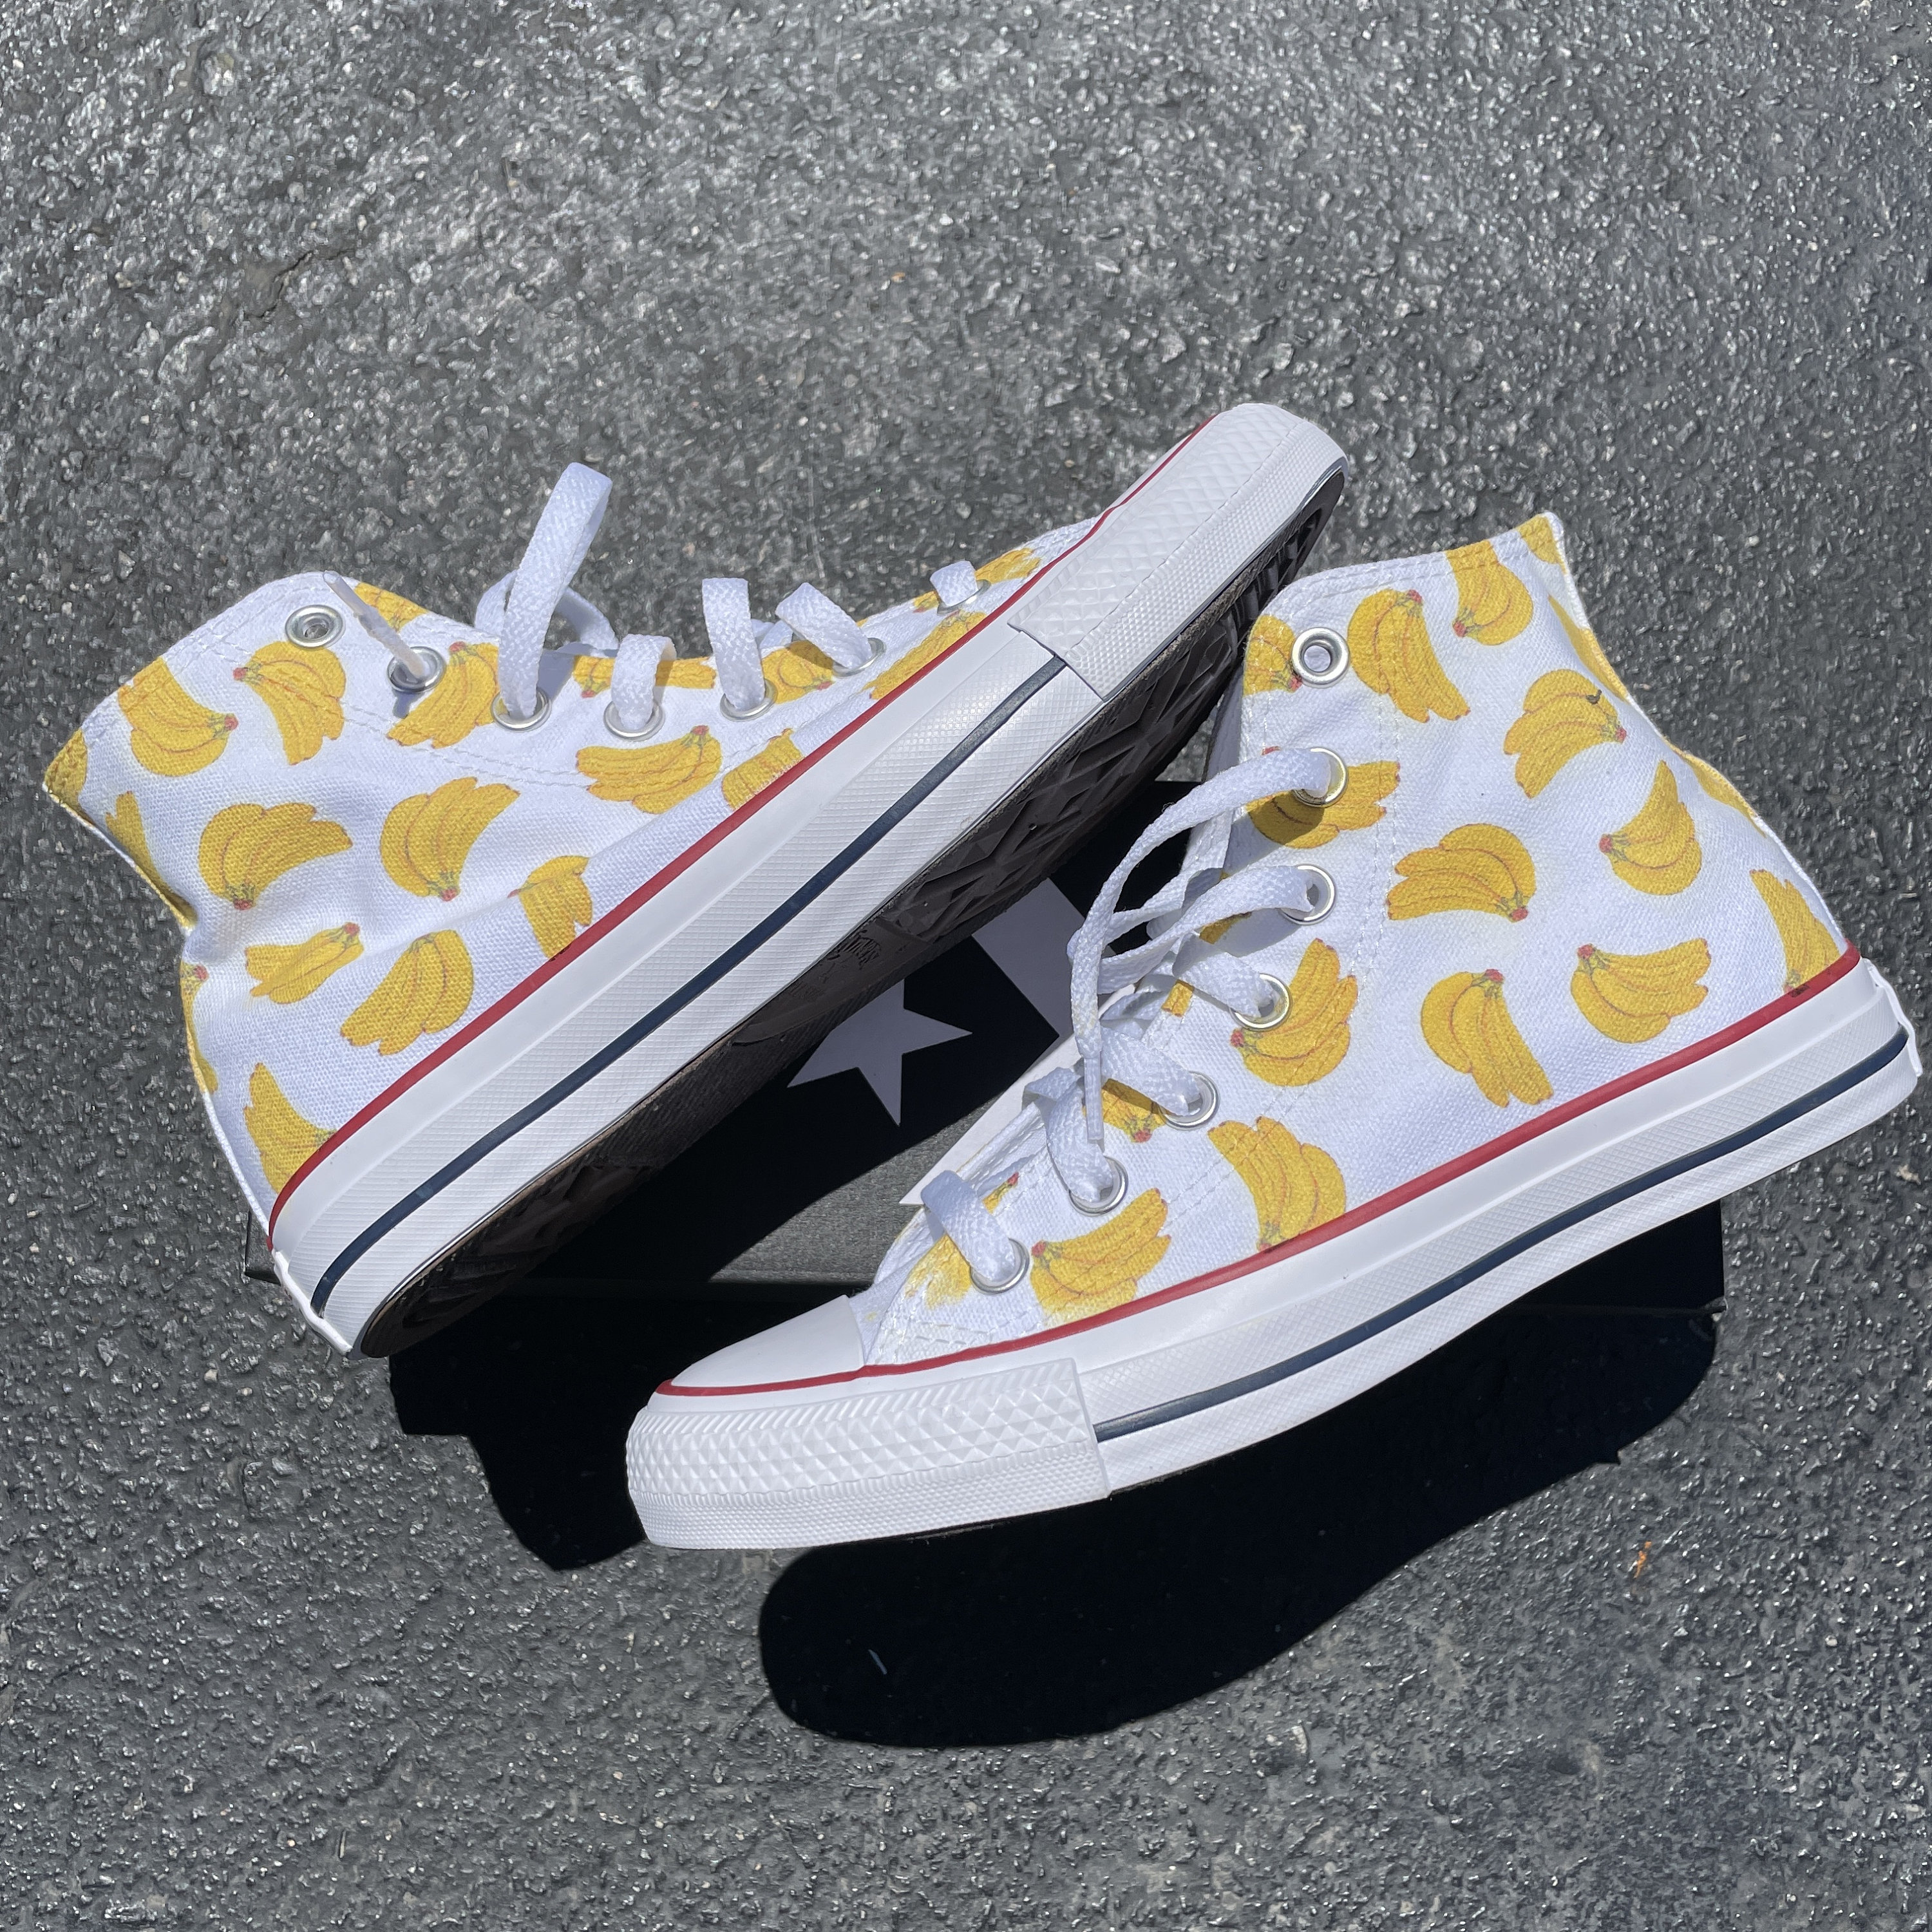 Buy Banana Bunches High Top Converse Online in India - Etsy